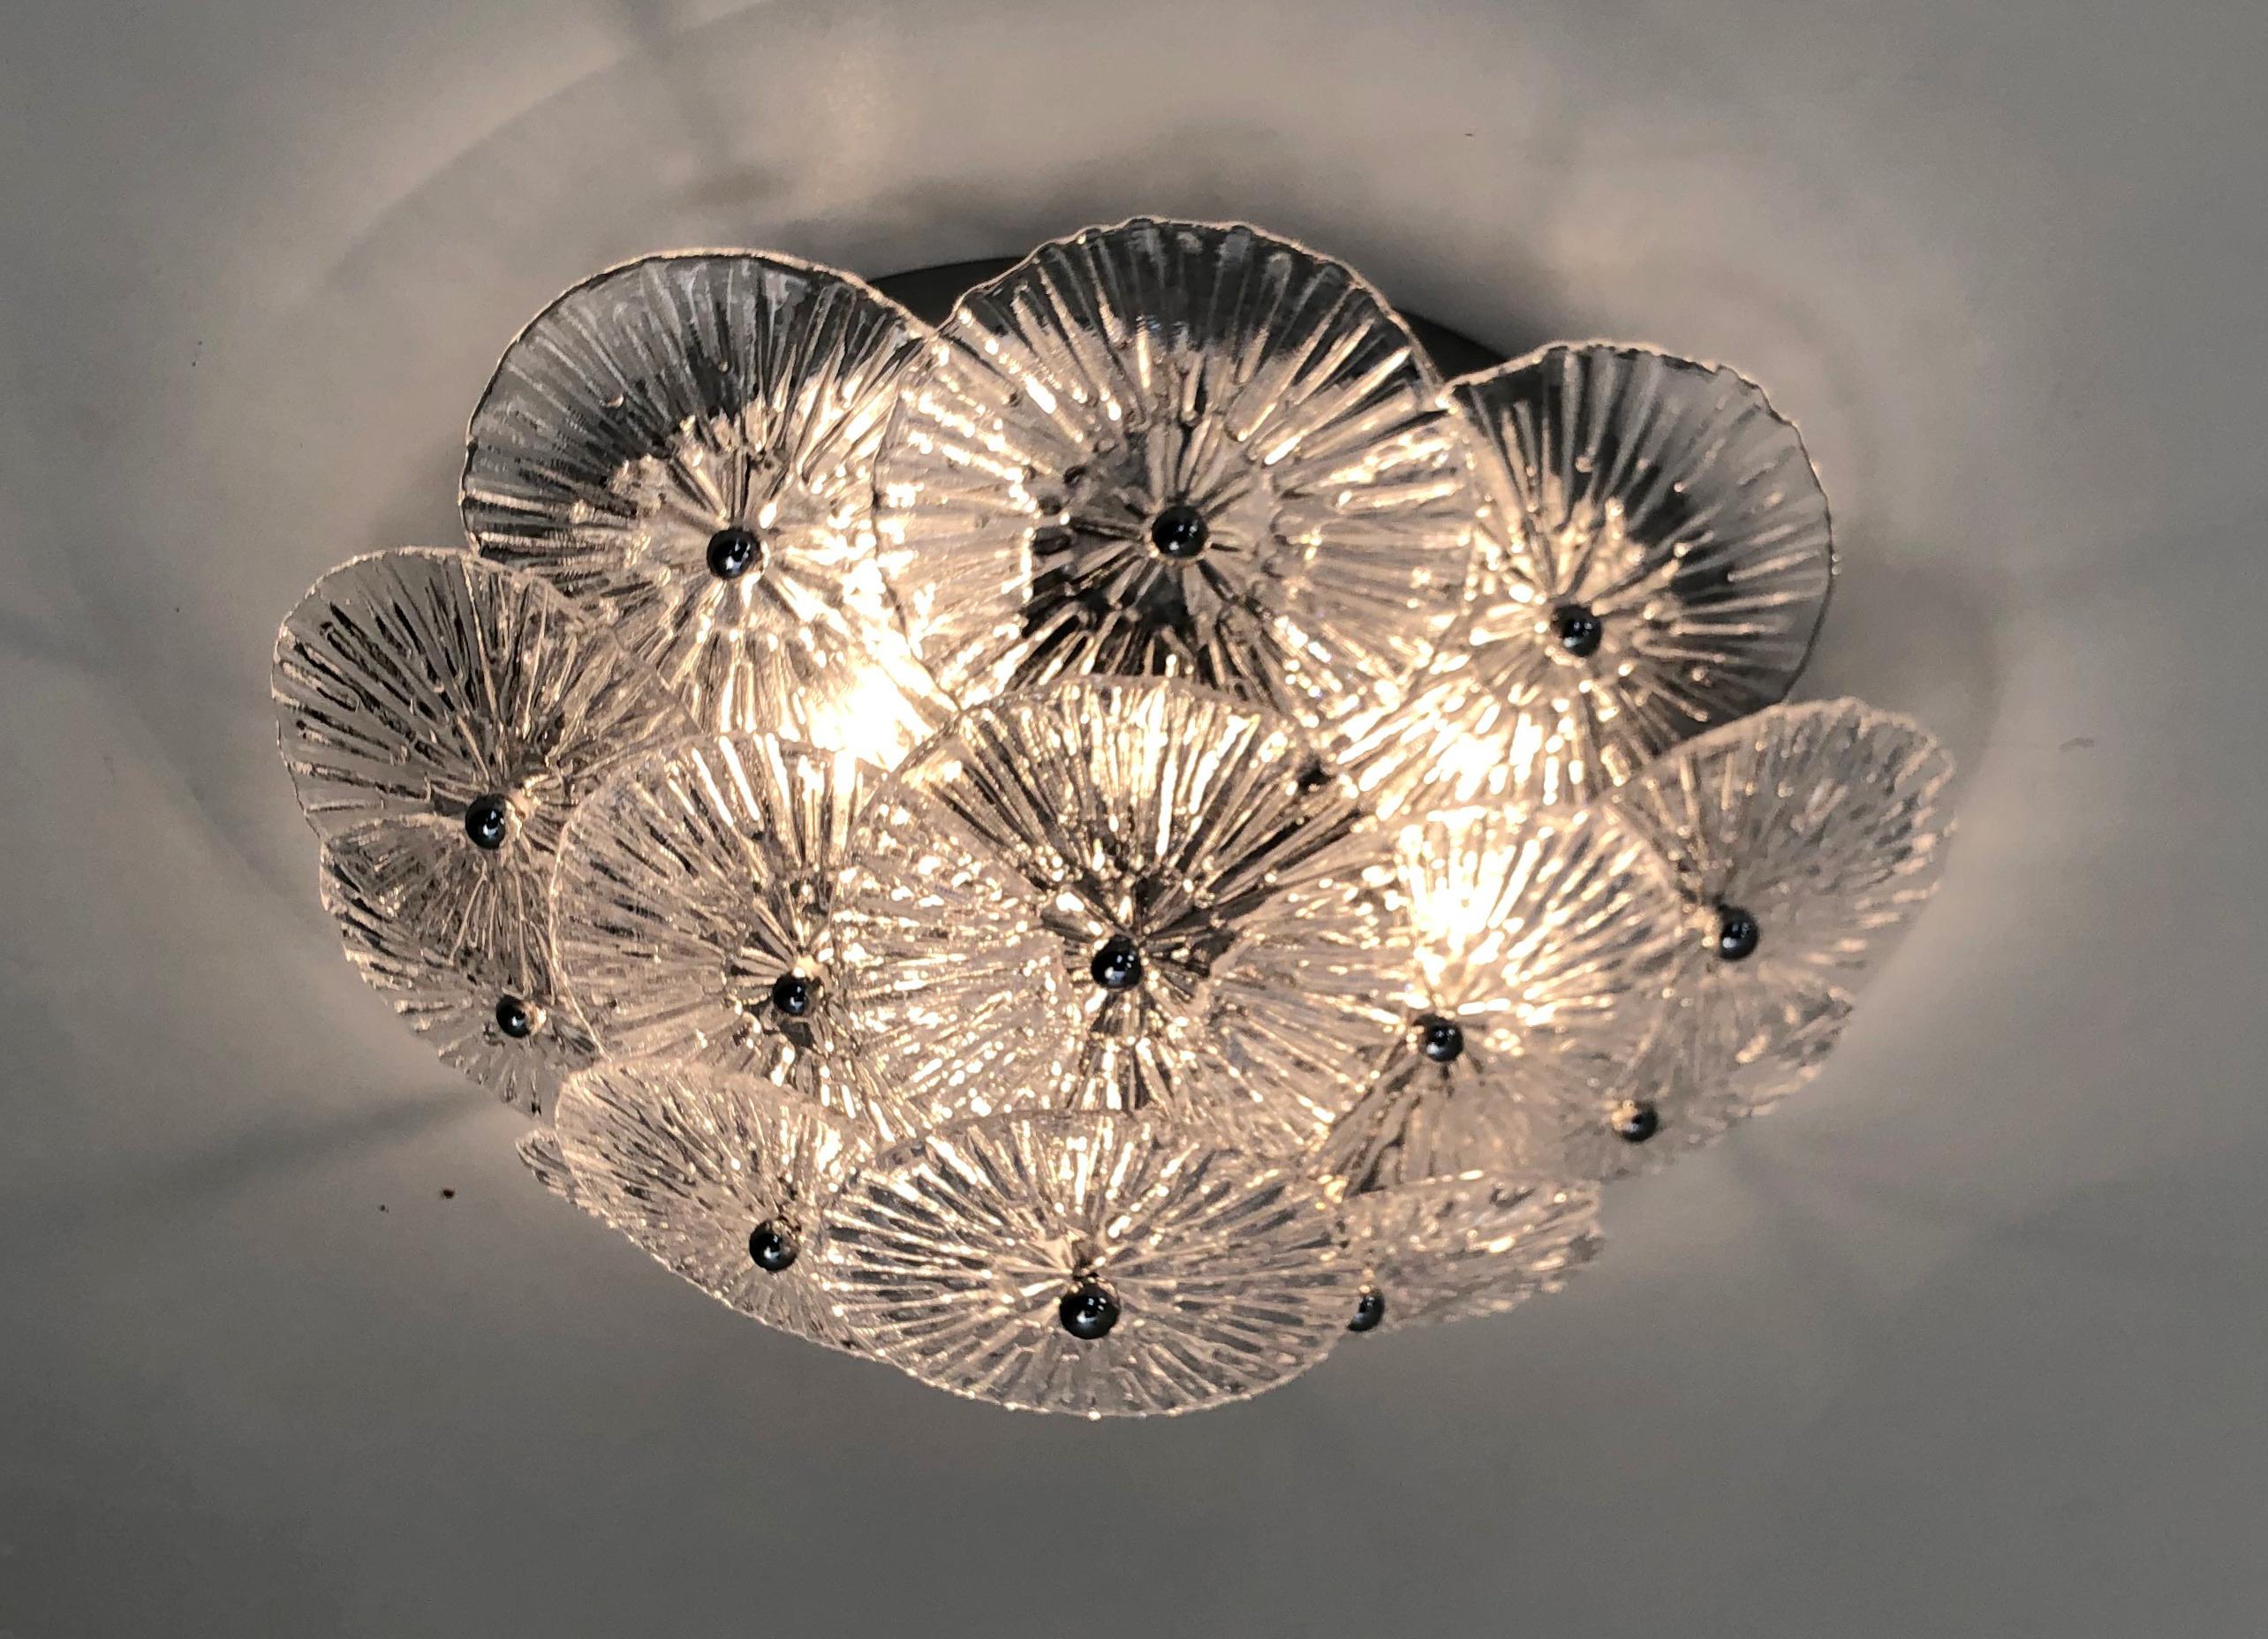 Italian flush mount with layered textured clear Murano glass discs mounted on polished chrome finish metal frame, designed by Fabio Bergomi for Fabio Ltd / Made in Italy
3 lights / E12 or E14 type / max 40W each
Measures: Diameter 20 inches, height